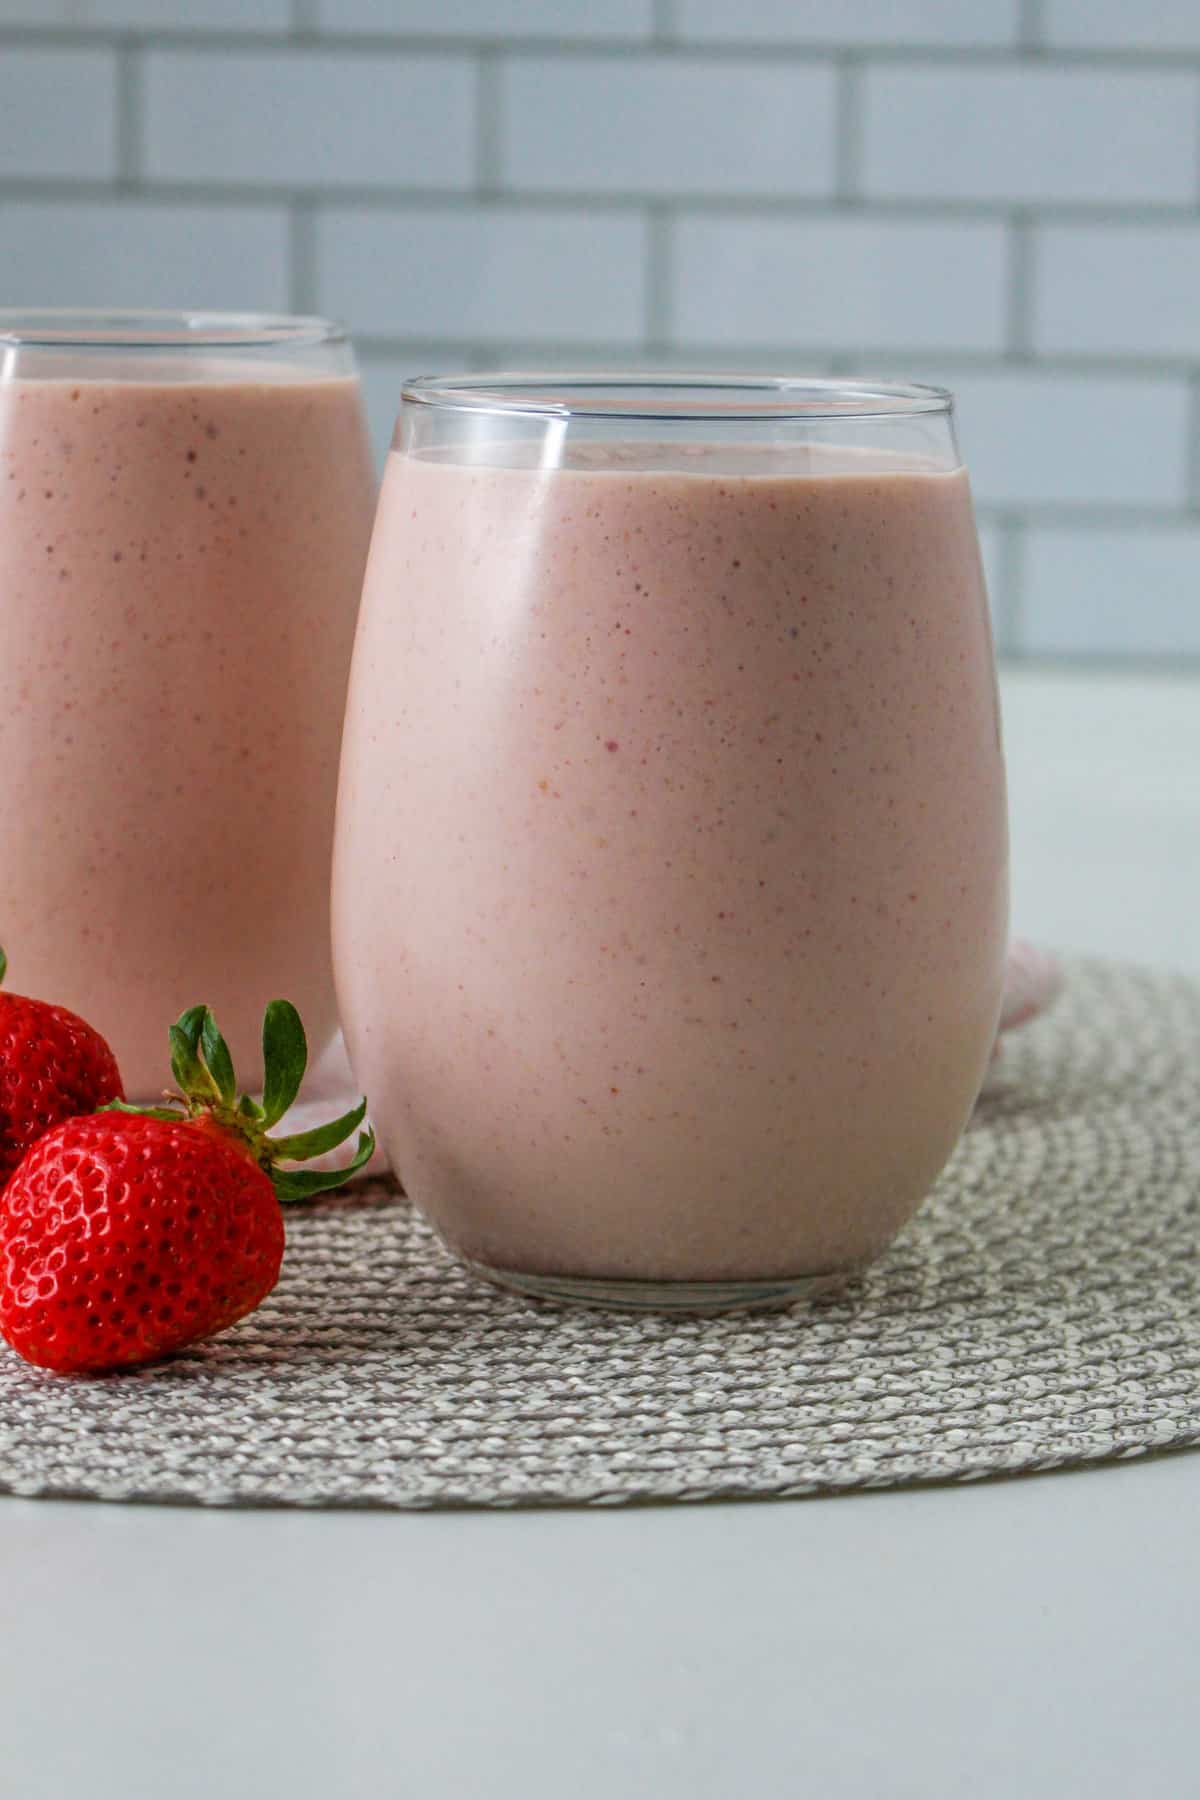 https://forktospoon.com/wp-content/uploads/2023/06/Peanut-Butter-and-Jelly-Smoothie-Sample-1-4.jpg